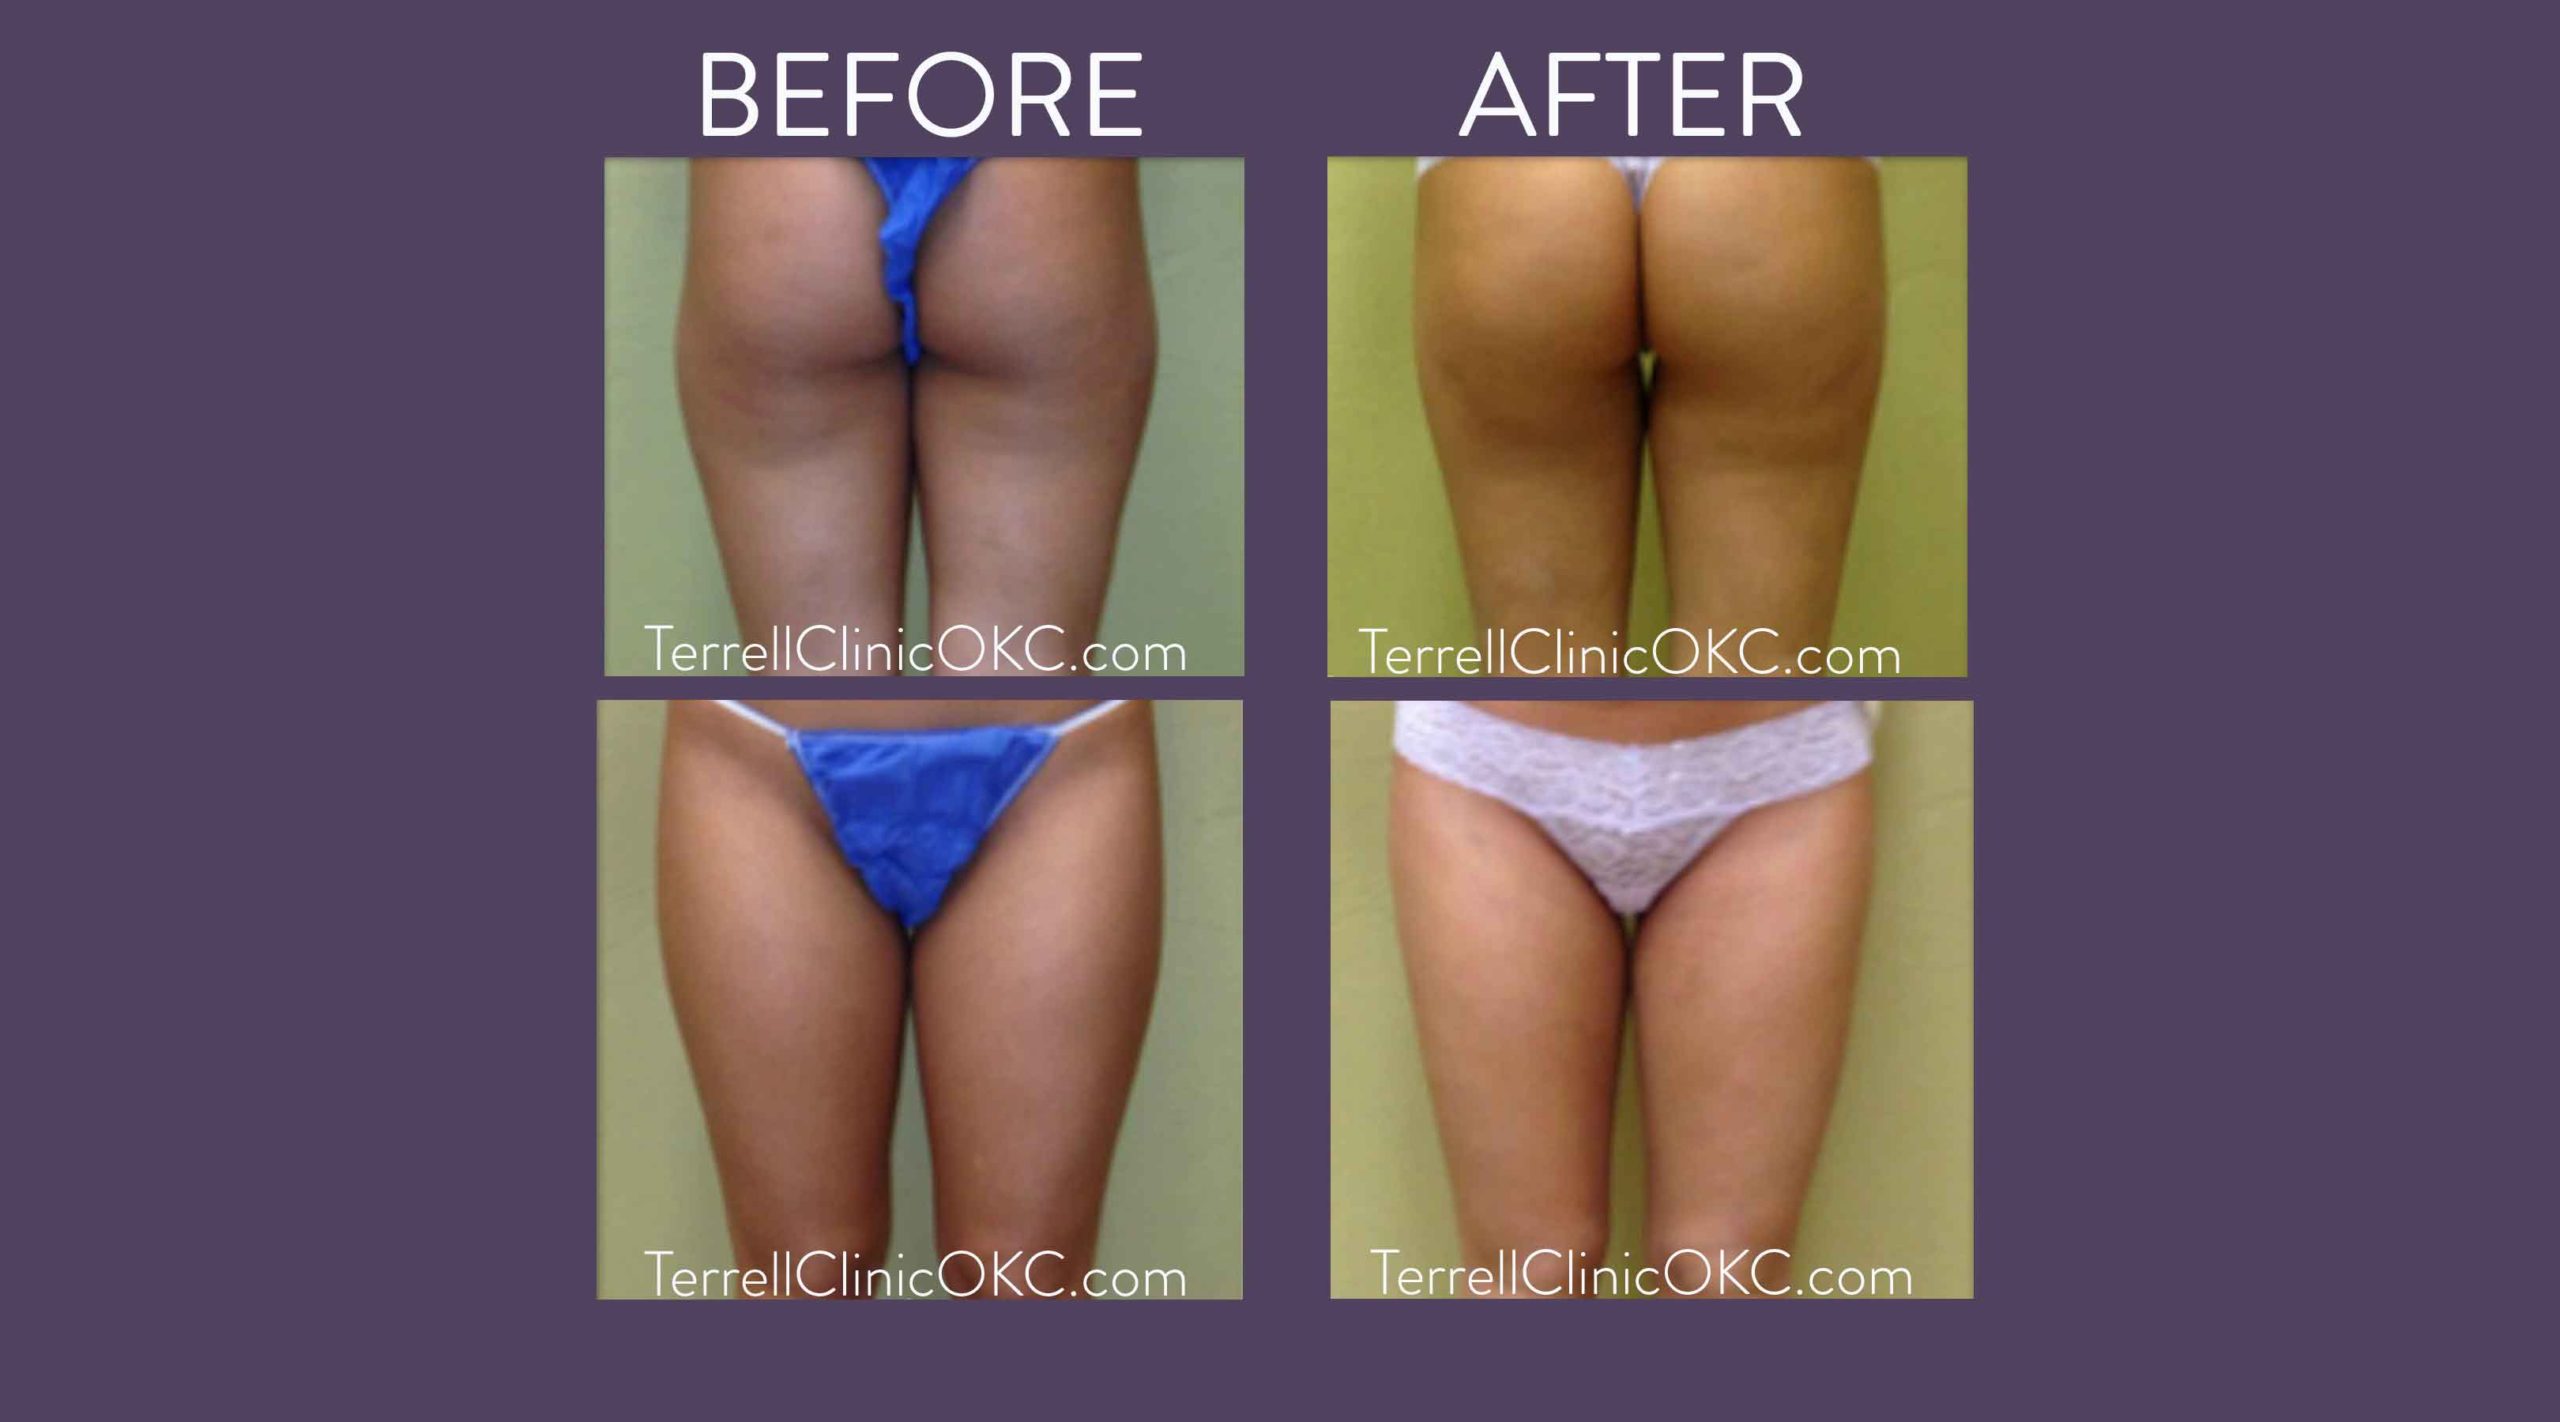 Outer Thighs Liposuction - KleinLipo - Liposuction Surgery of